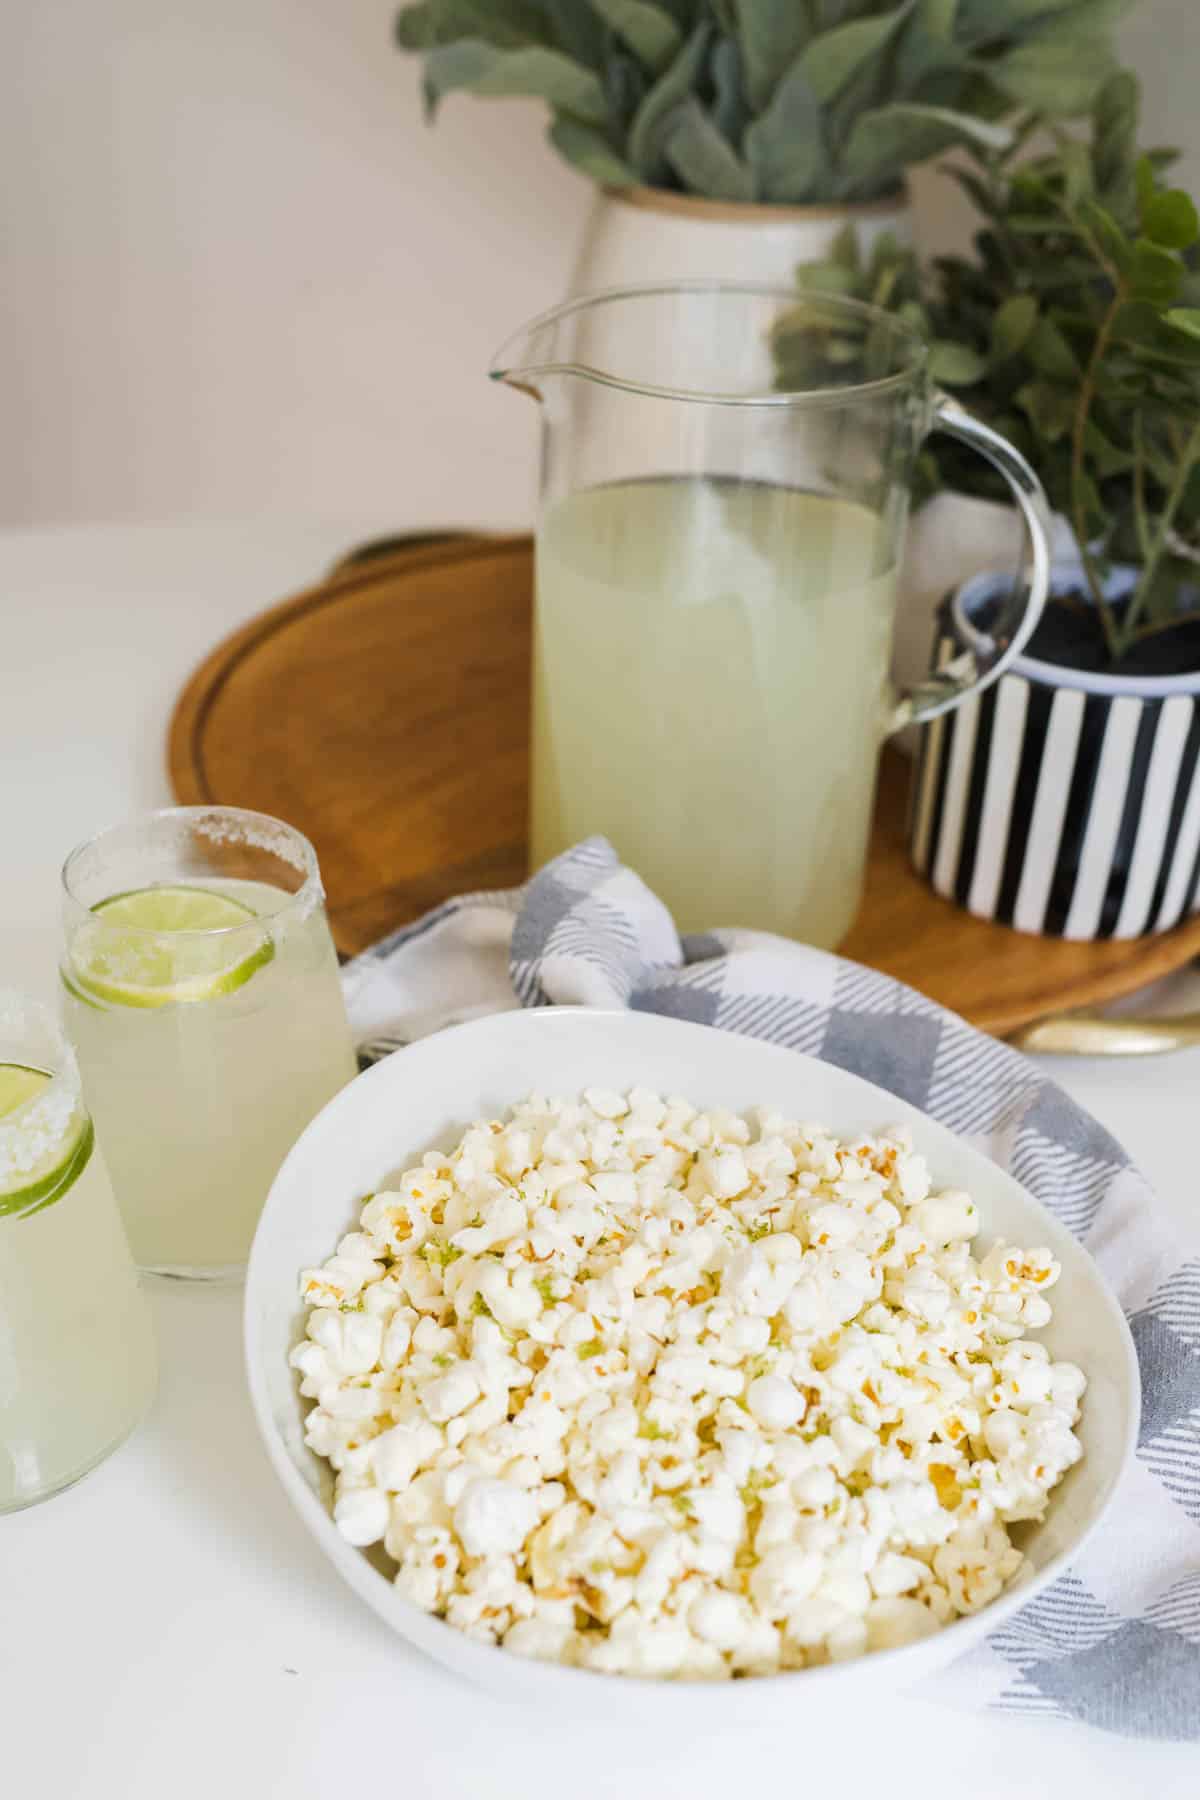 A bowl of popcorn on a table with a pitcher of margaritas and two glasses of margaritas.